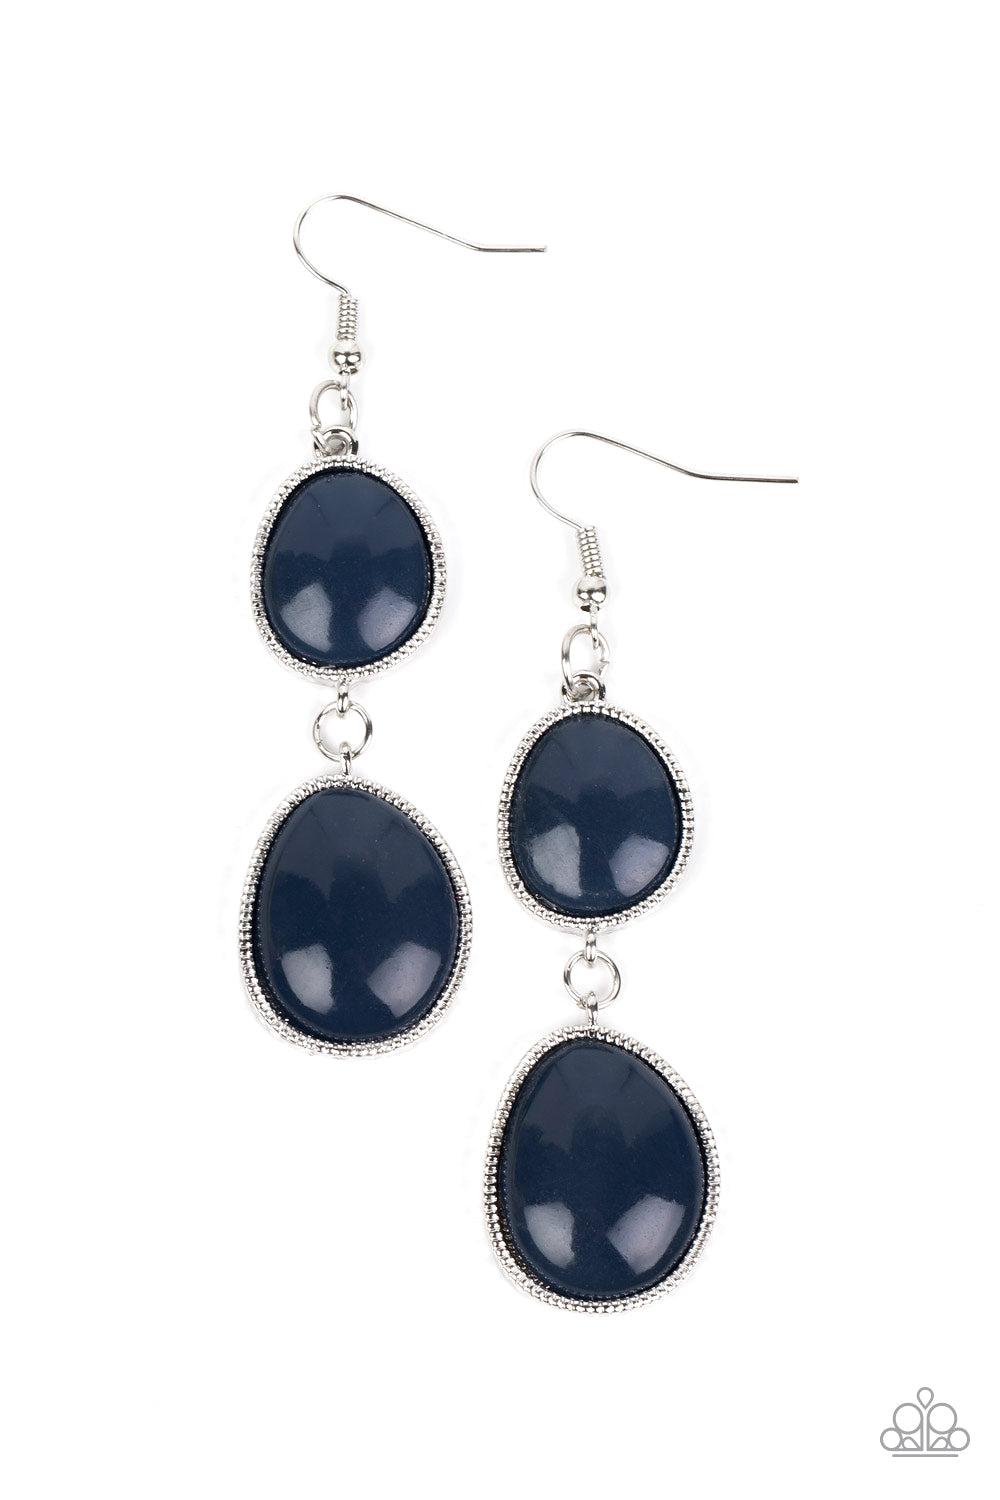 Mediterranean Myth Navy Blue Earrings - Paparazzi Accessories- lightbox - CarasShop.com - $5 Jewelry by Cara Jewels